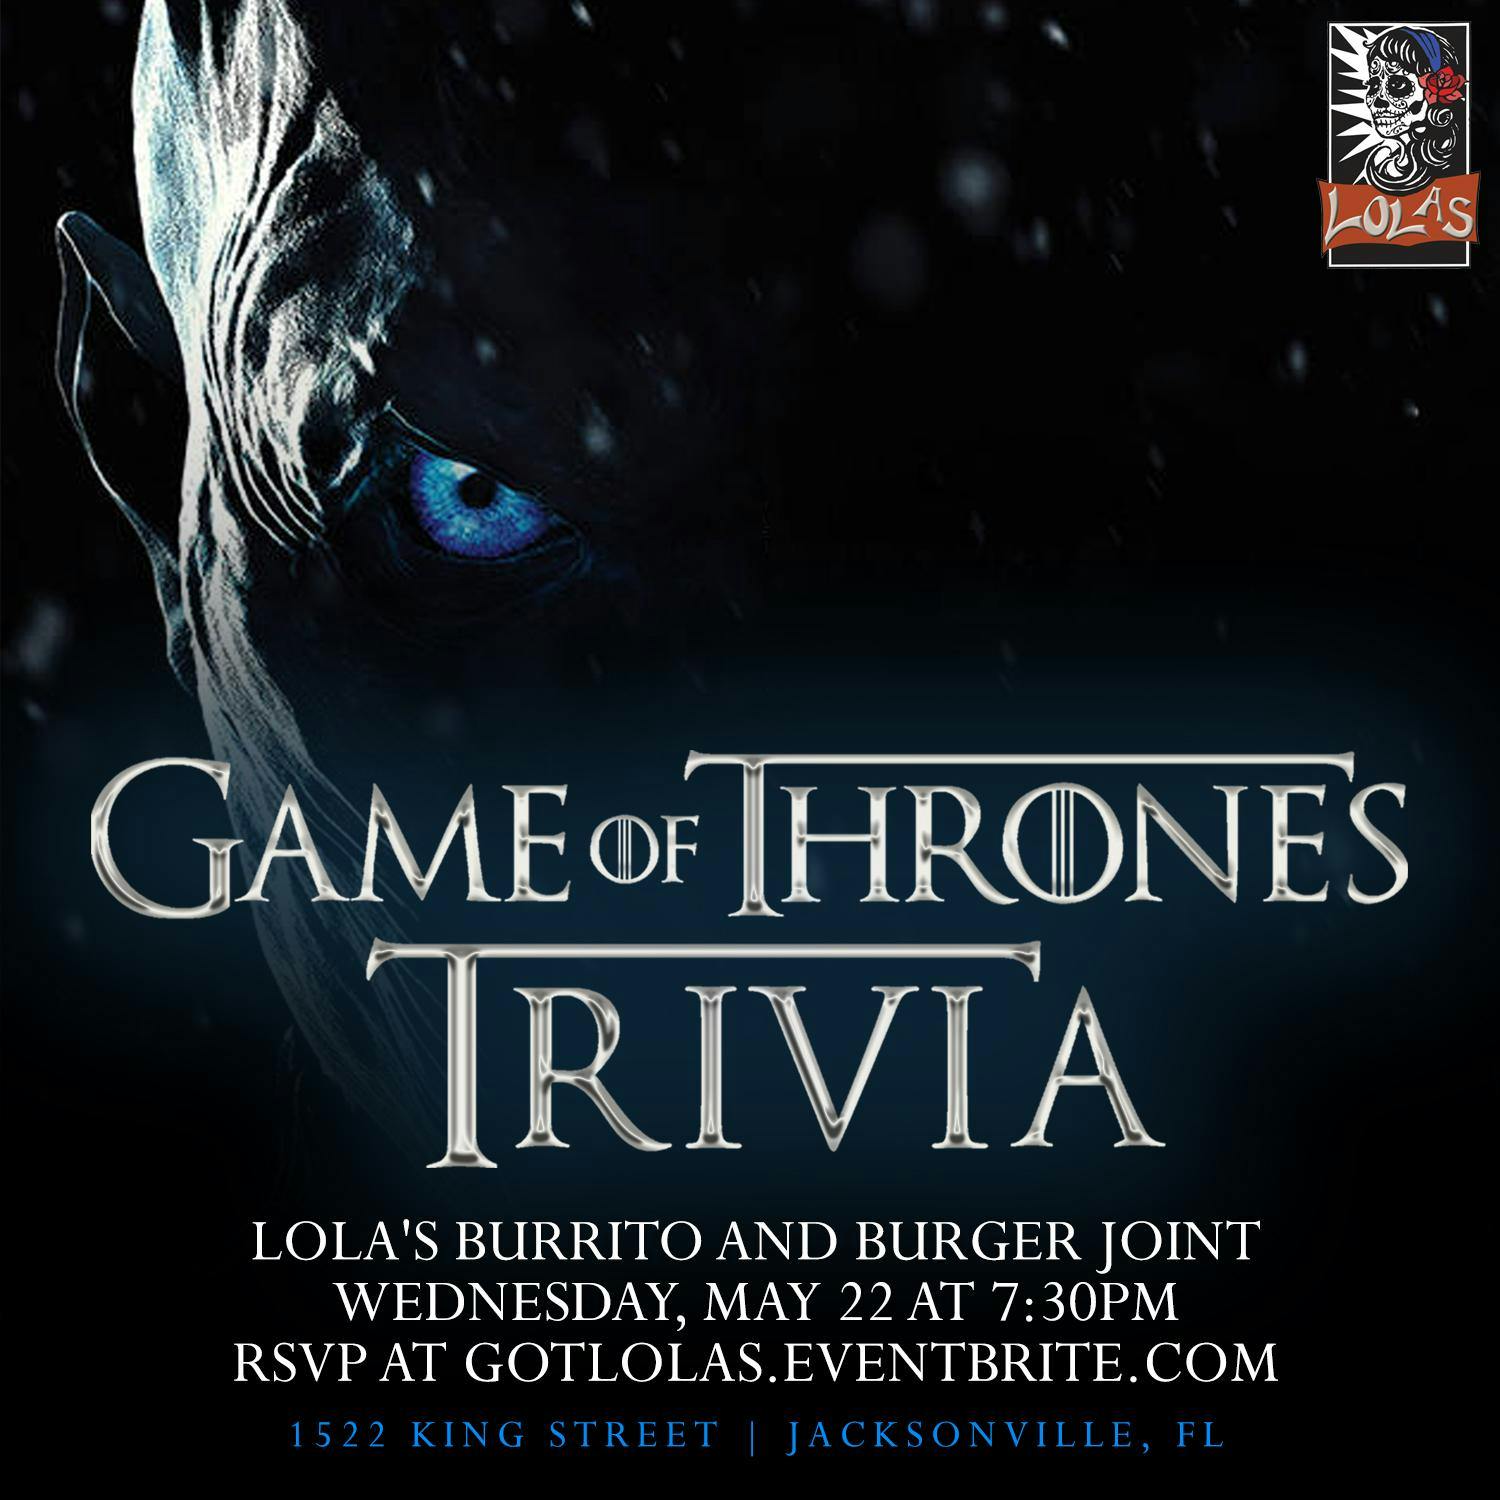 Game Of Thrones Trivia at Lola's Burrito & Burger Joint